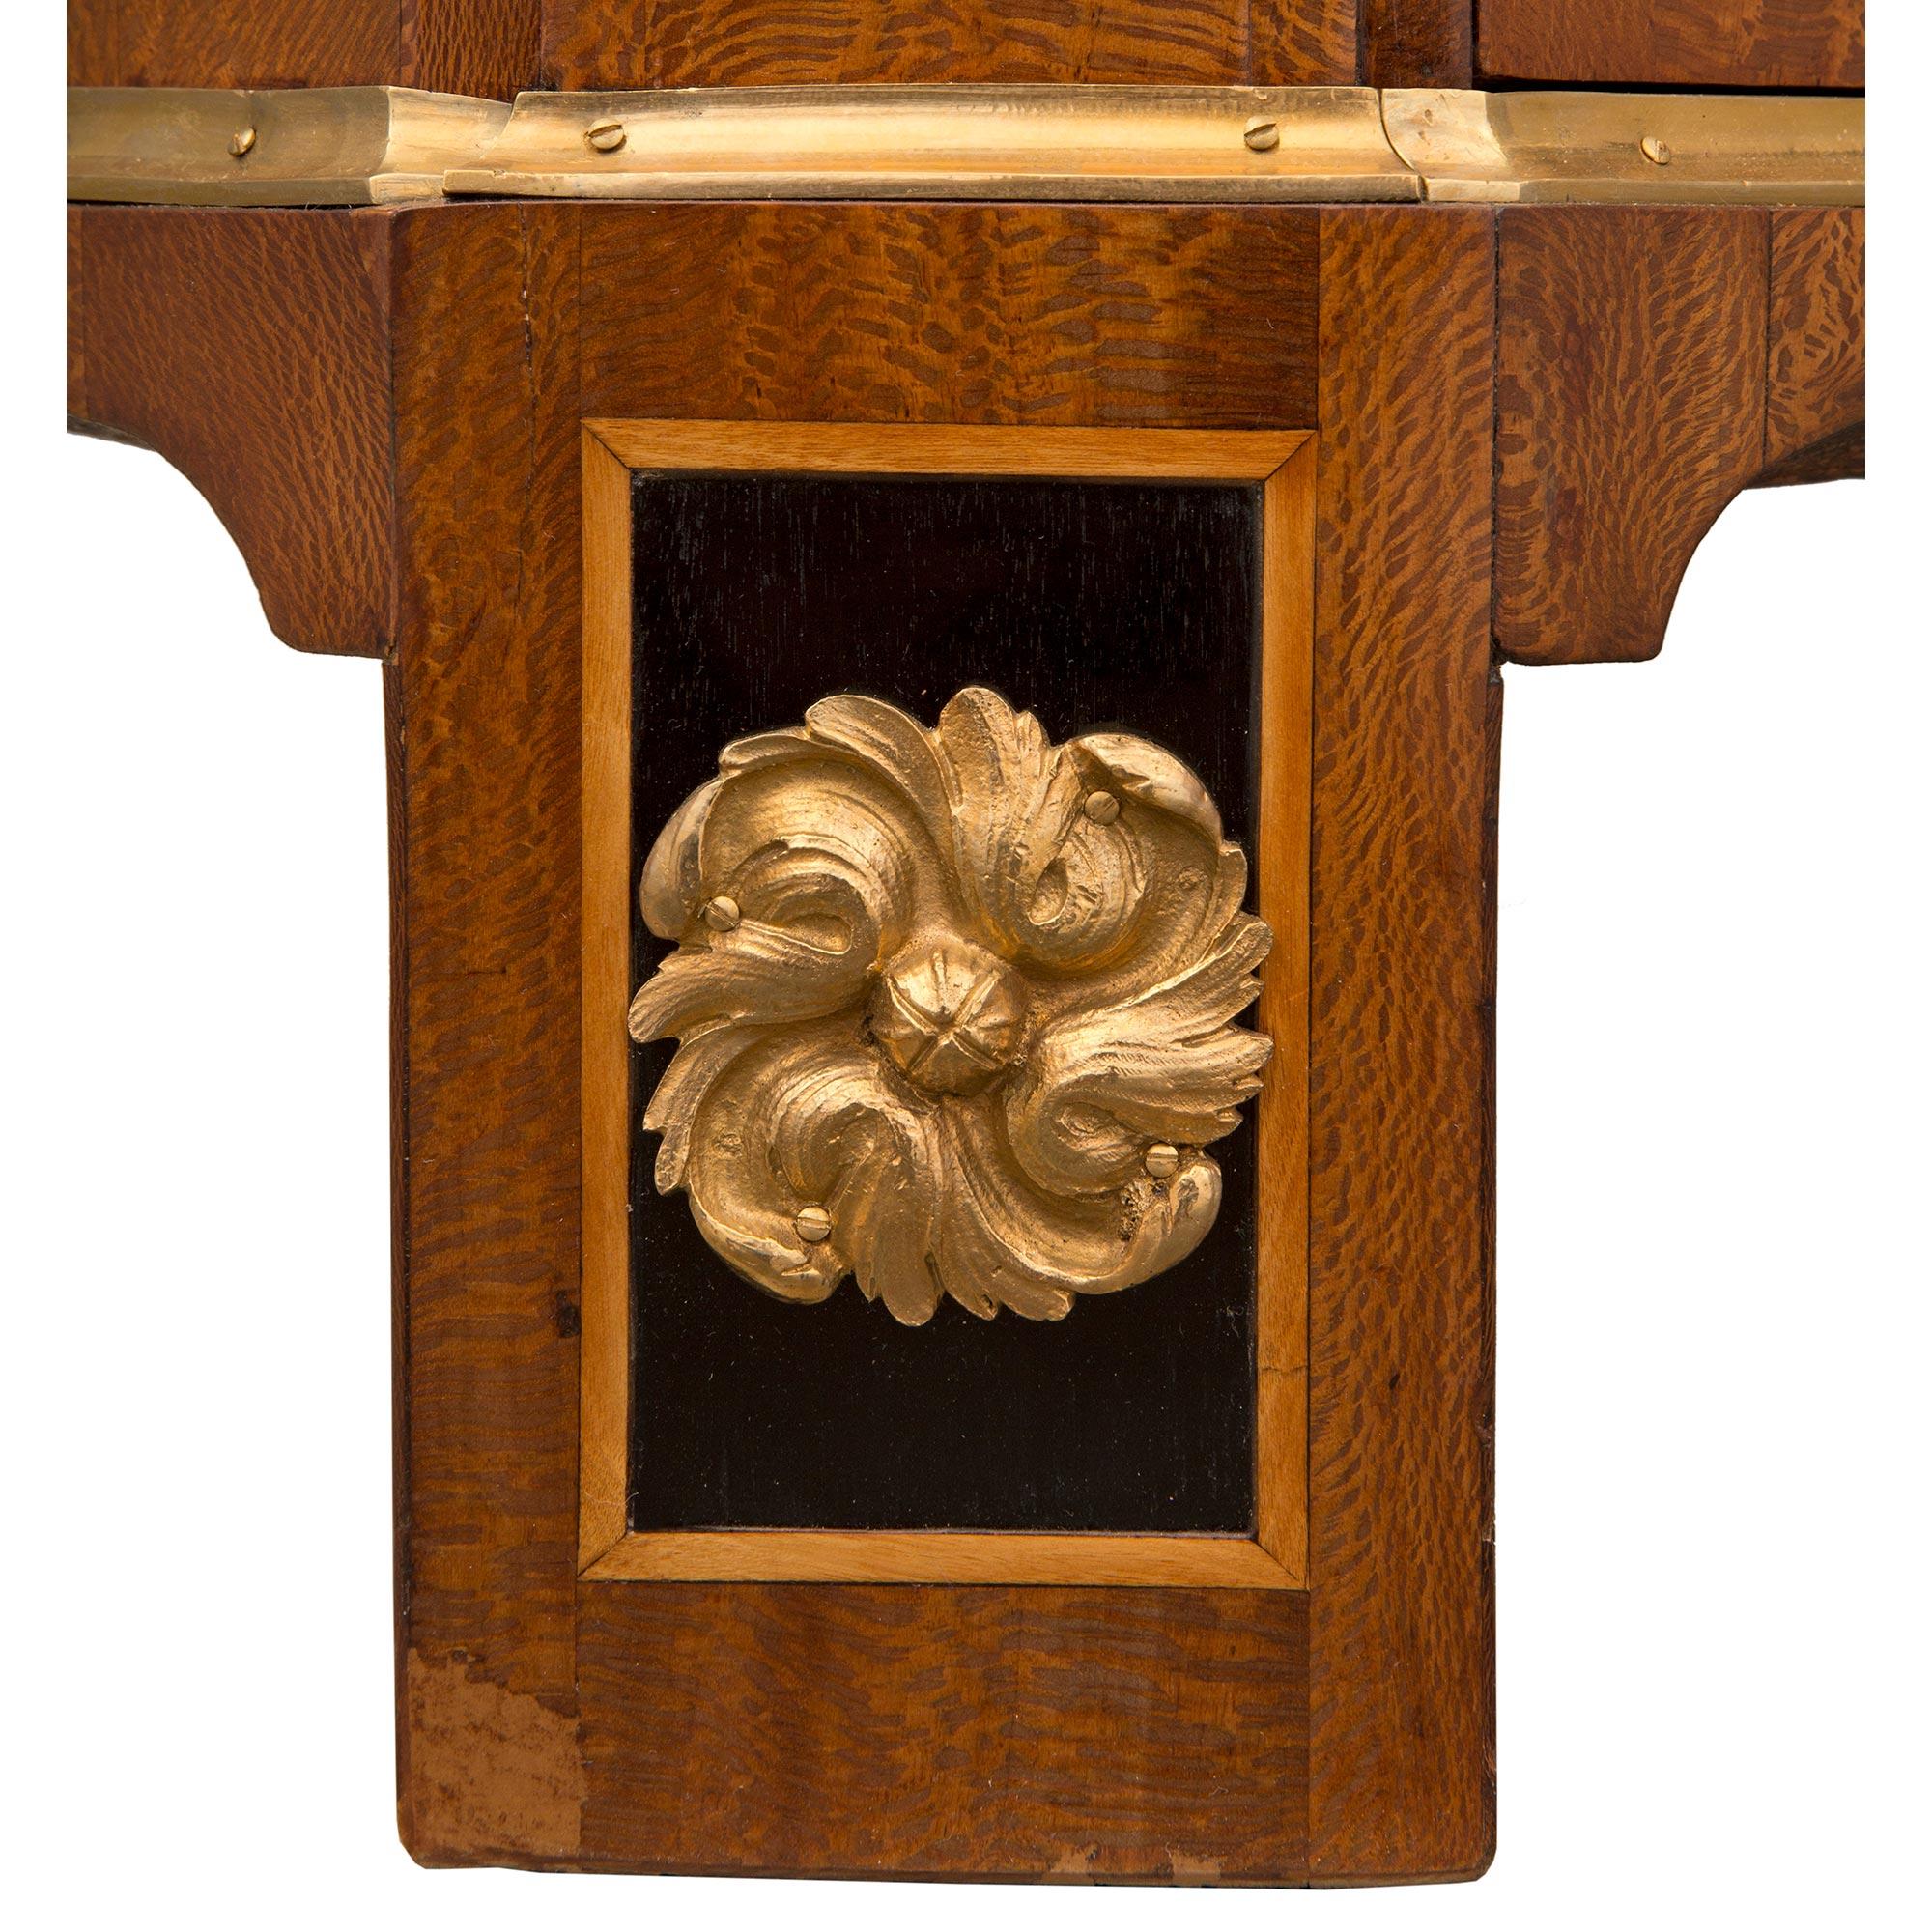 Italian 18th Century Japanese Lacquer and Lace Wood Veneer Cabinet For Sale 4